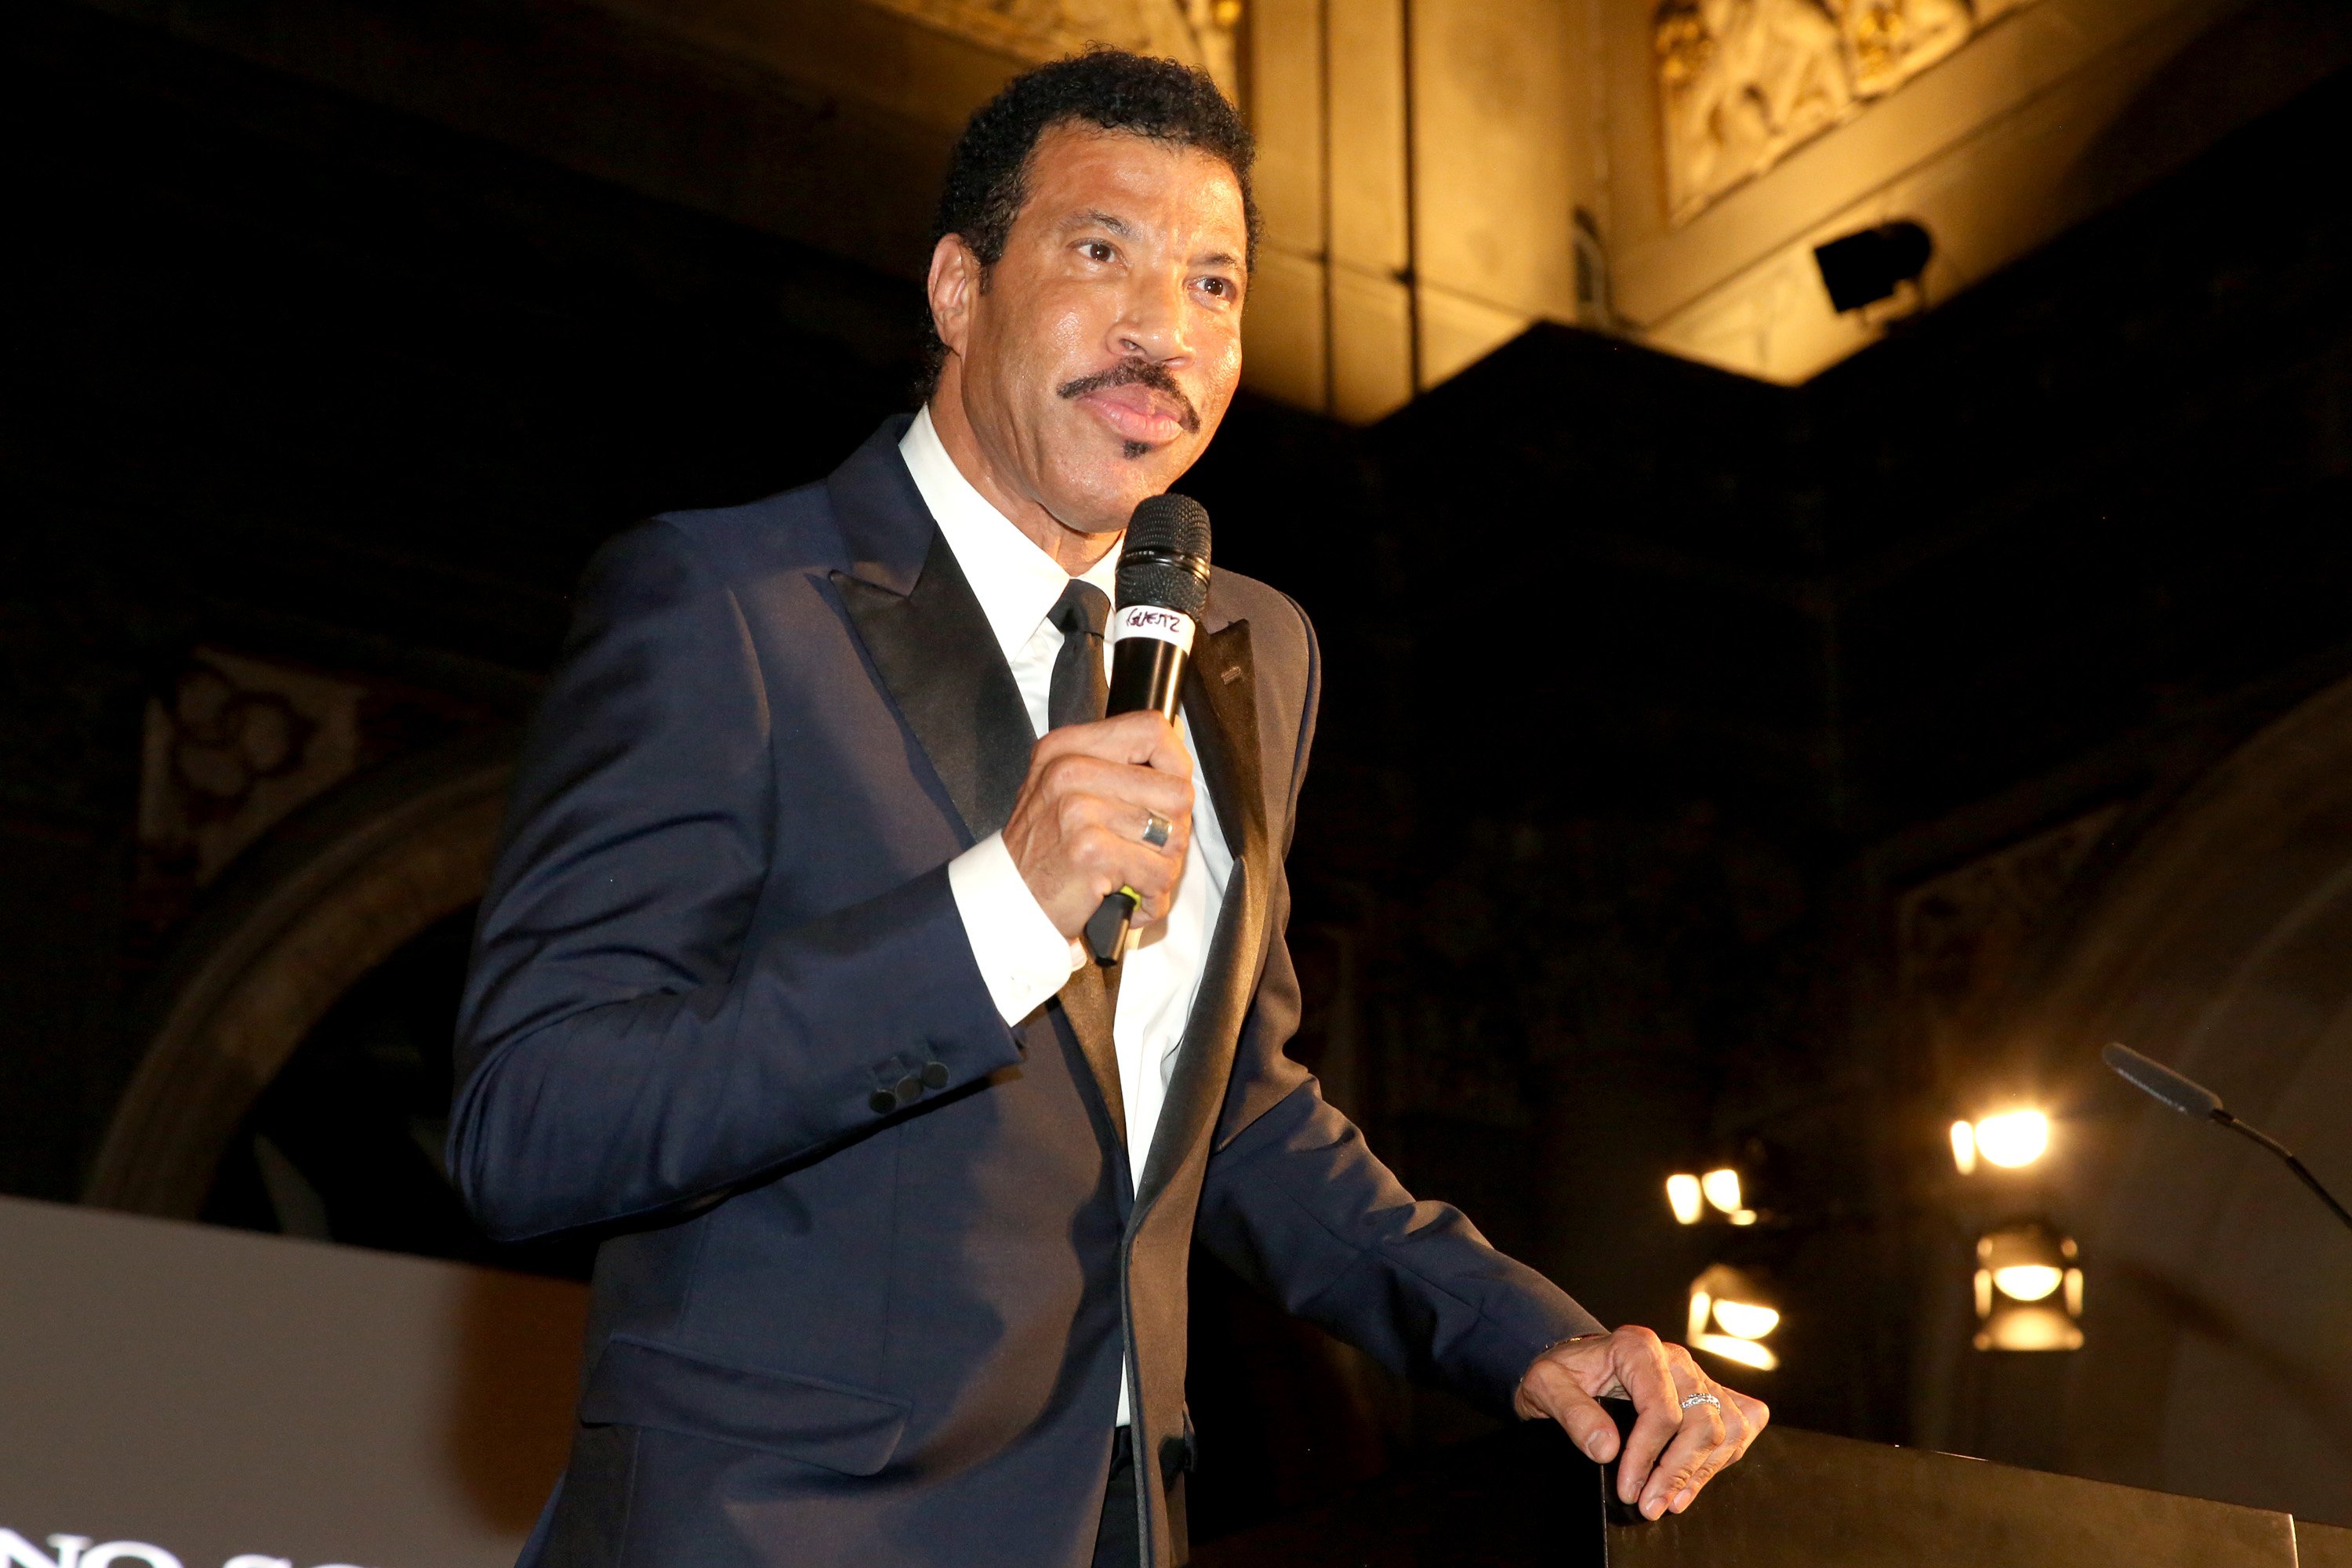  Lionel Richie accepting an award during the Celebrity Fight Night gala benefitting The Andrea Bocelli Foundation and The Muhammad Ali Parkinson Center in Florence, Italy | Photo: Rachel Murray/Getty Images for Celebrity Fight Night